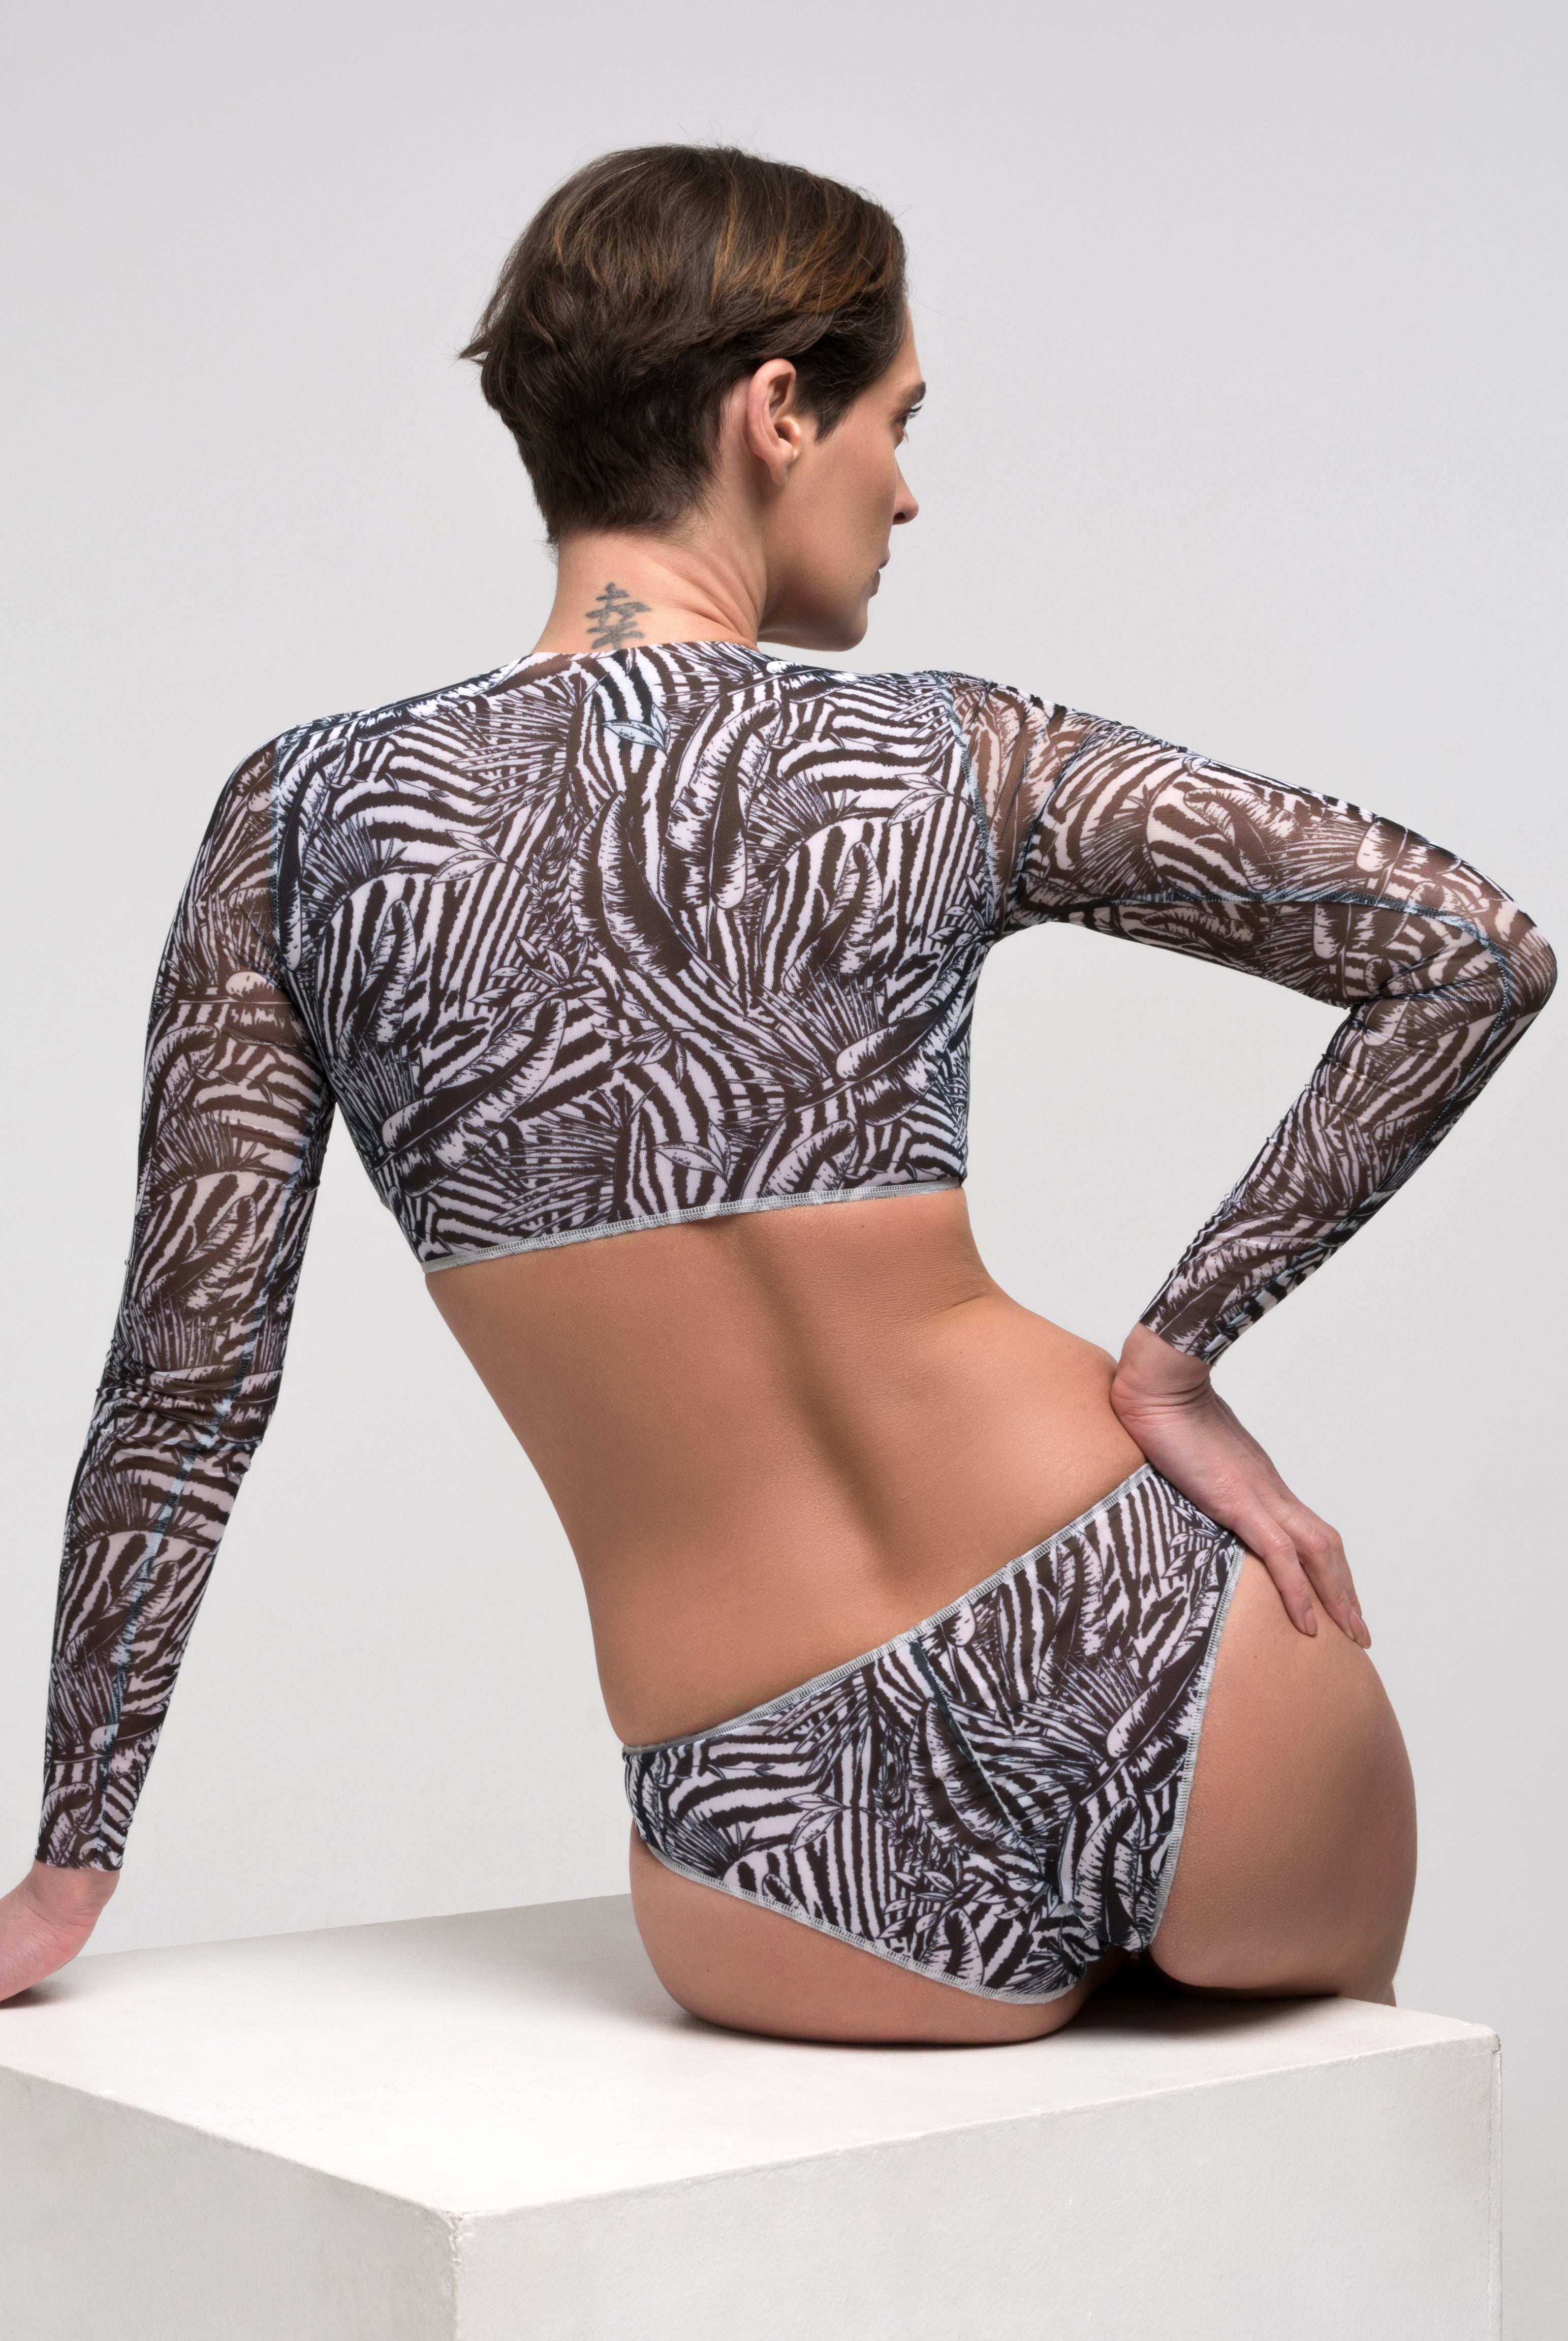 This file showcases sustainable tan-through smart swimsuits adorned with a trendy Fake Zebra print. Included is a classic bikini, offering both style and sun protection.